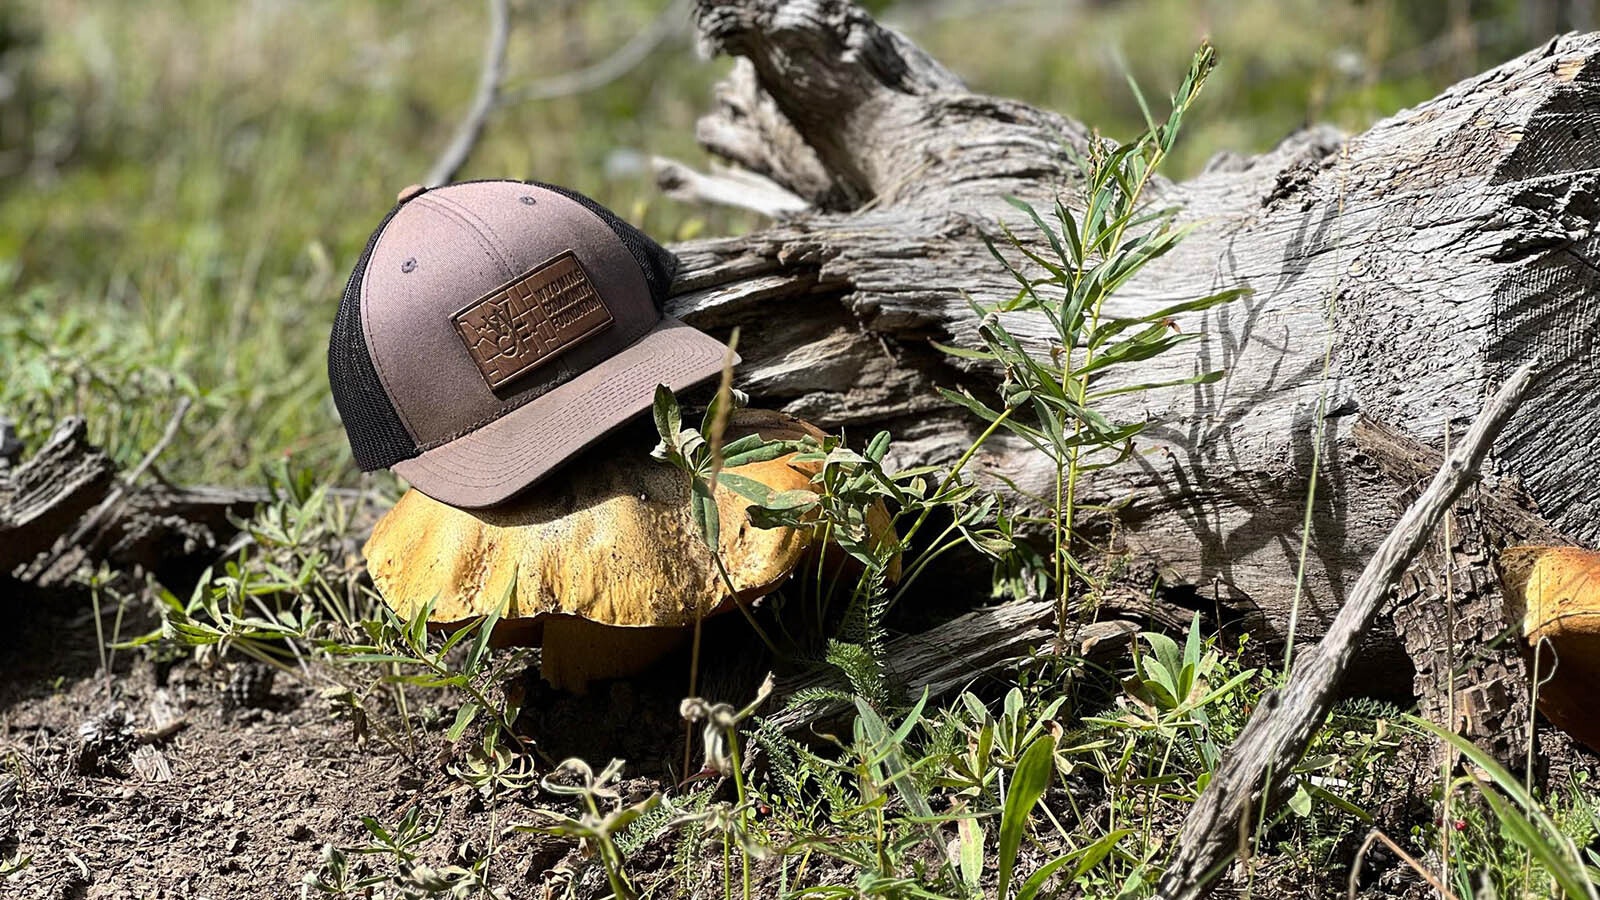 Porcini mushrooms can get quite large and are another favorite mushroom to find in Wyoming.